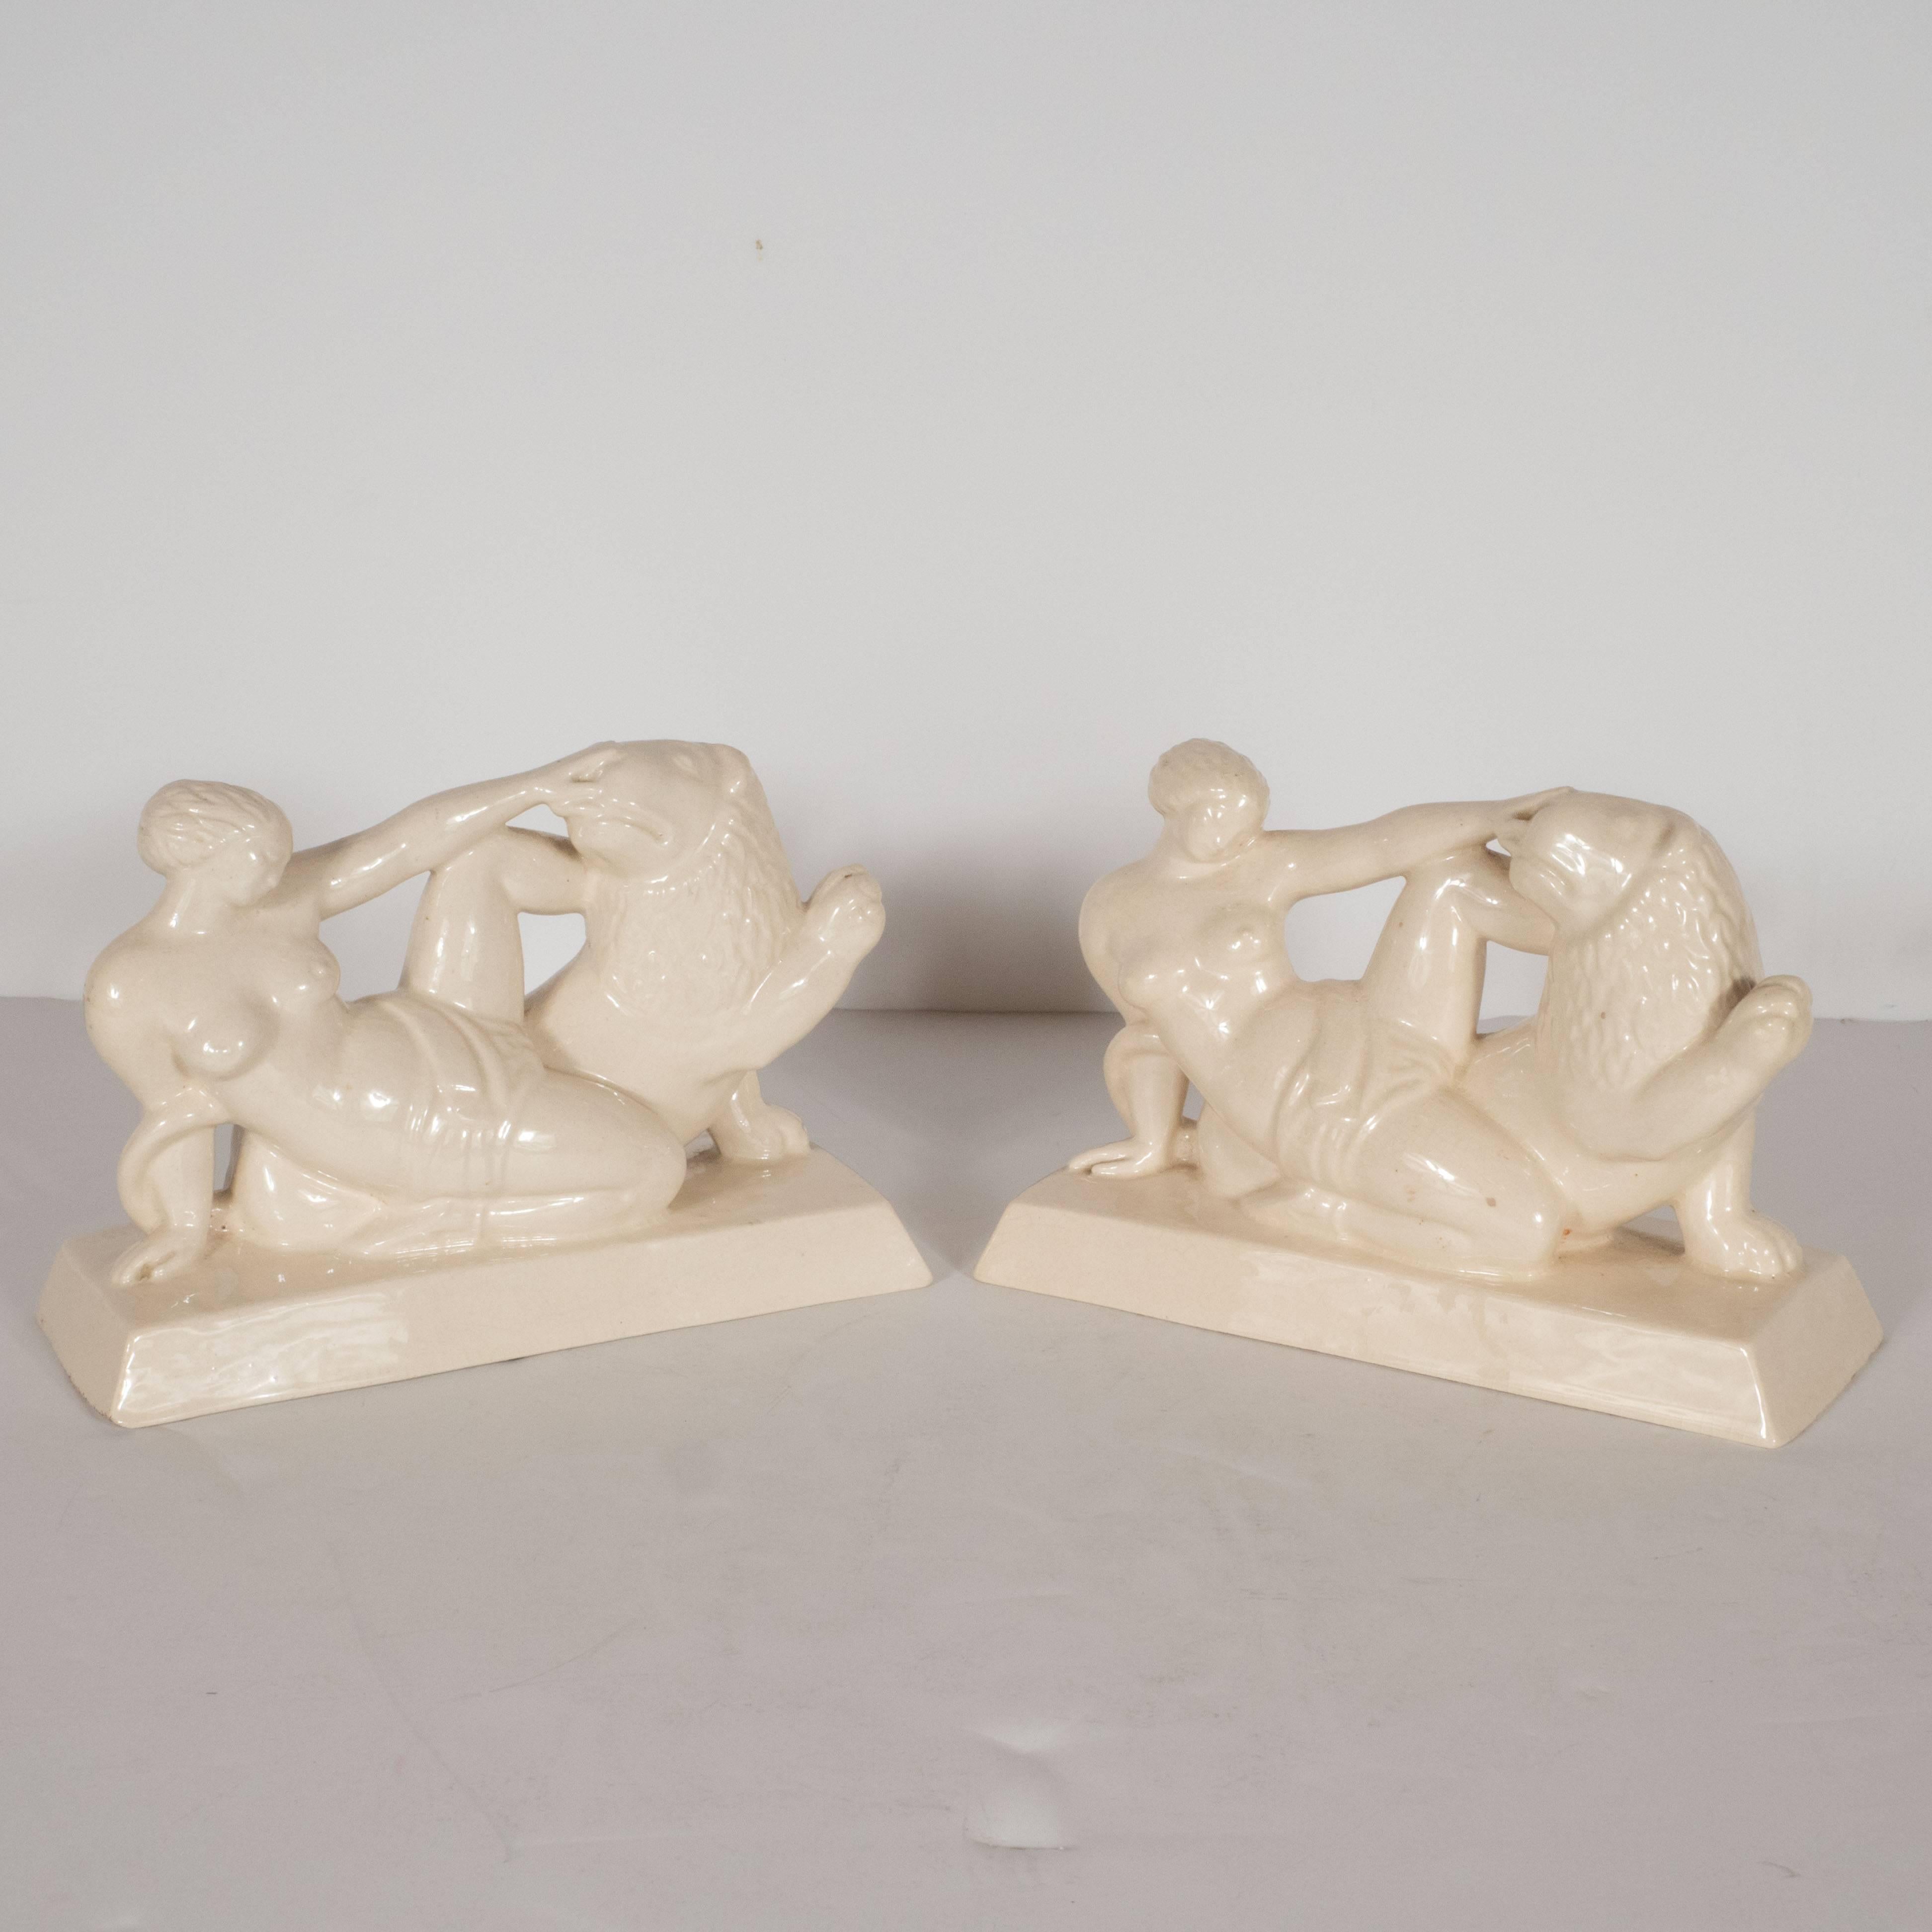 This lovely pair of bookmarks, depicting a nude female figure petting the head of a lion, is rendered in a style suggestive of a Classical Greek tableau. It has been realized in white glazed ceramic which features a very subtle craquelure finish.